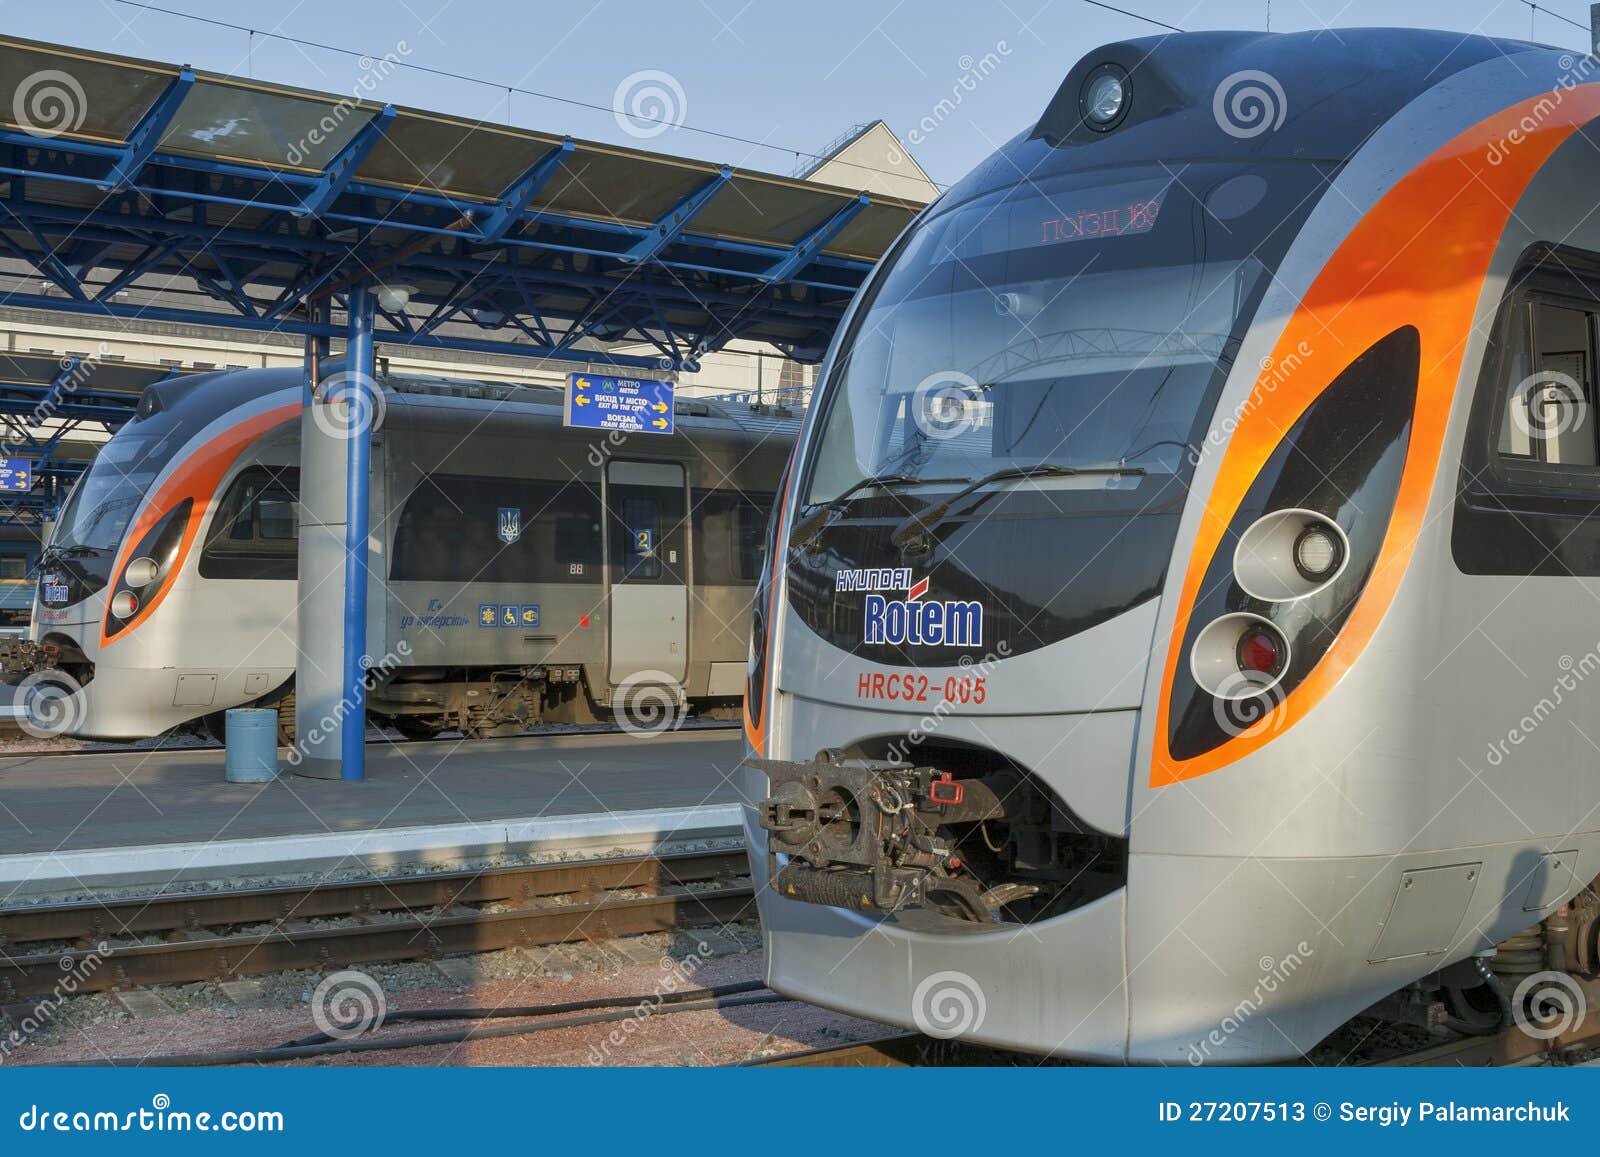 Hyundai Rotem interested in further service of Ukrainian high-speed trains